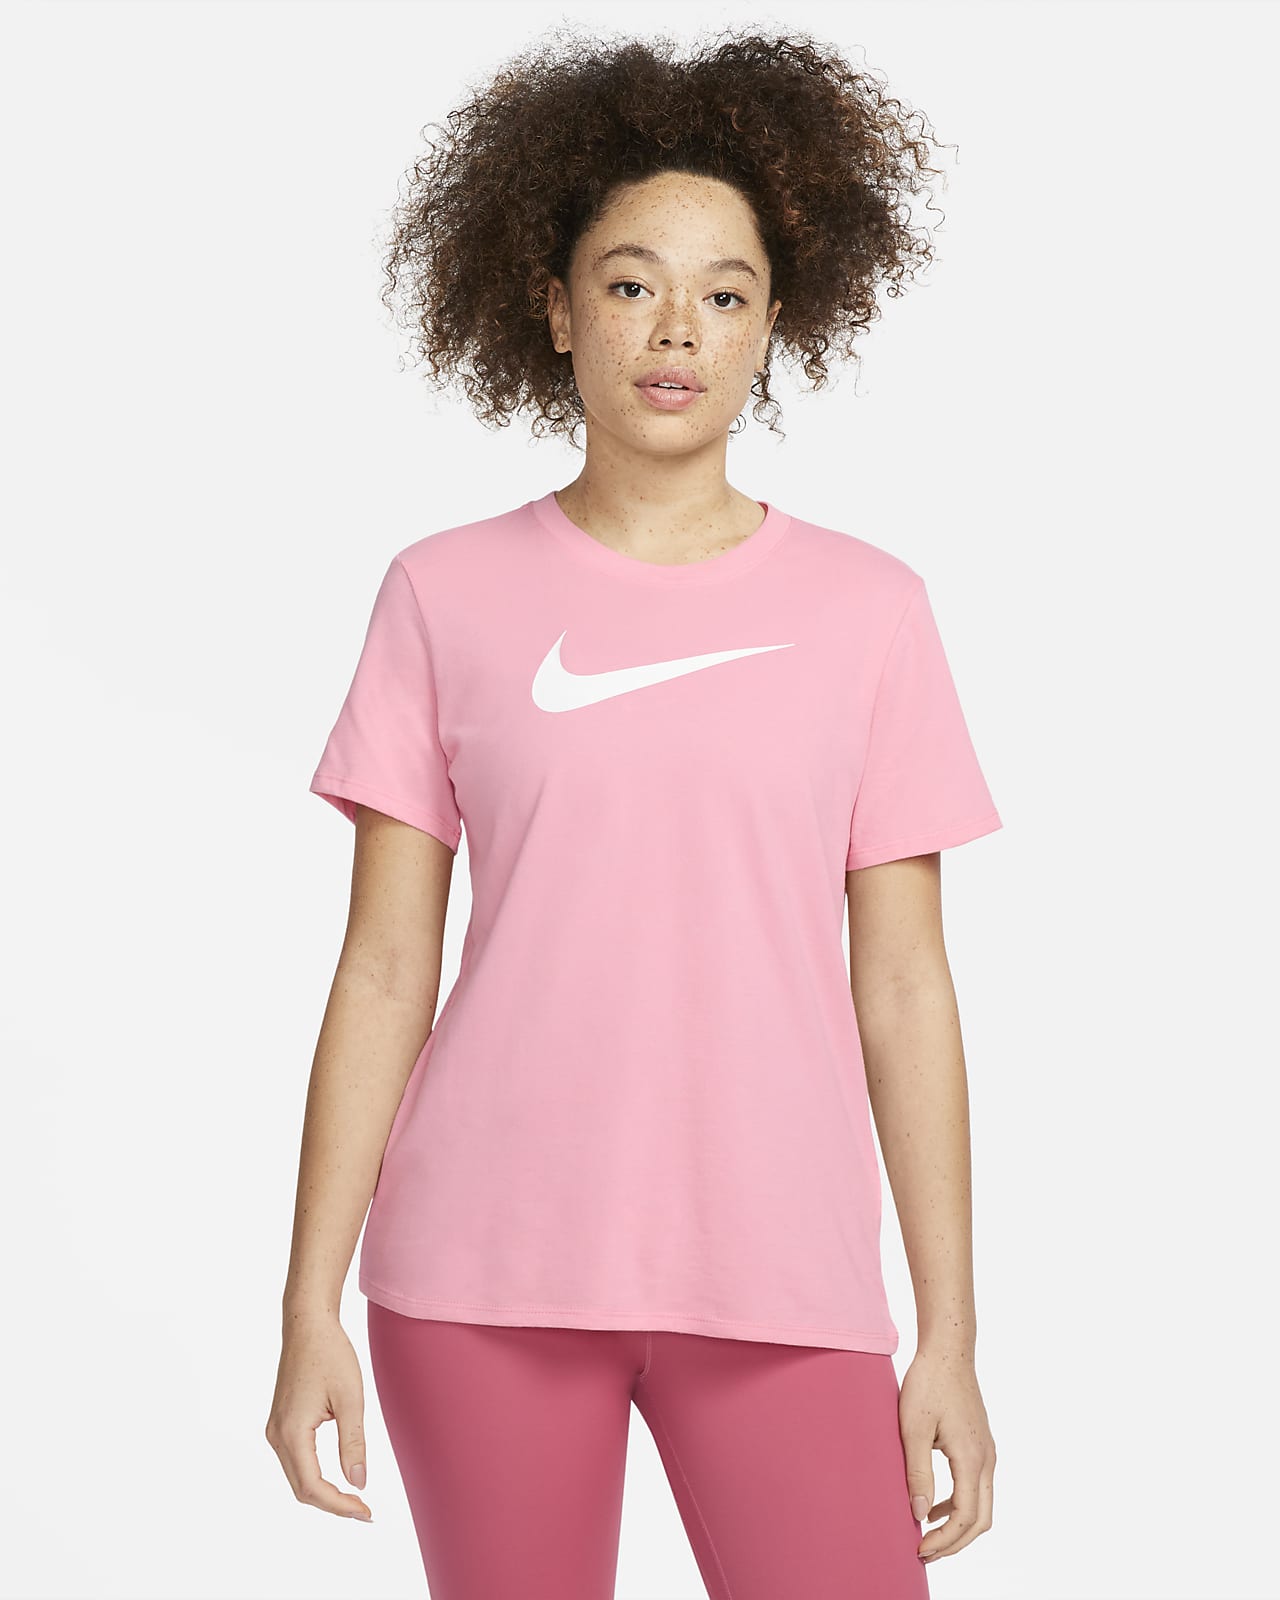 Eve among Accepted pink nike swoosh t shirt visual deep century